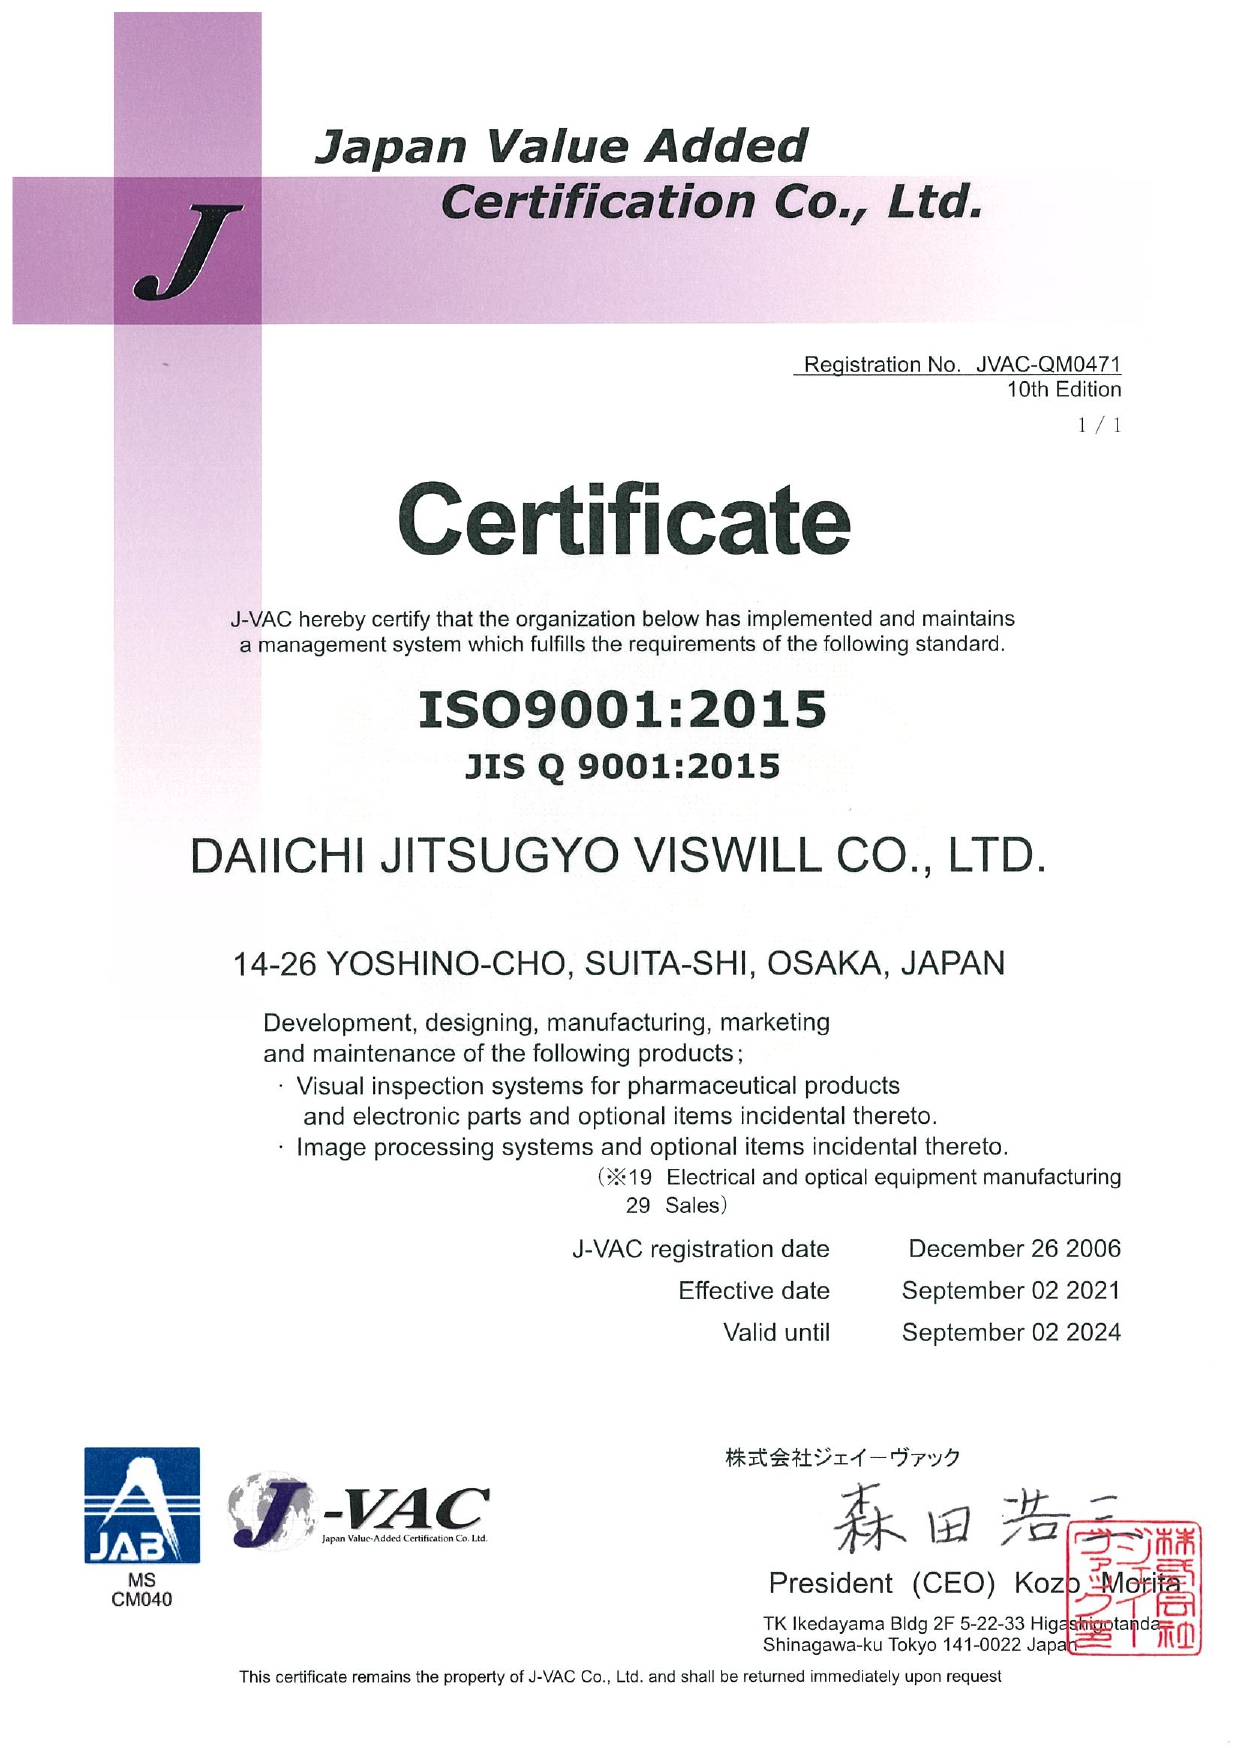 Acquisition of ISO 9001